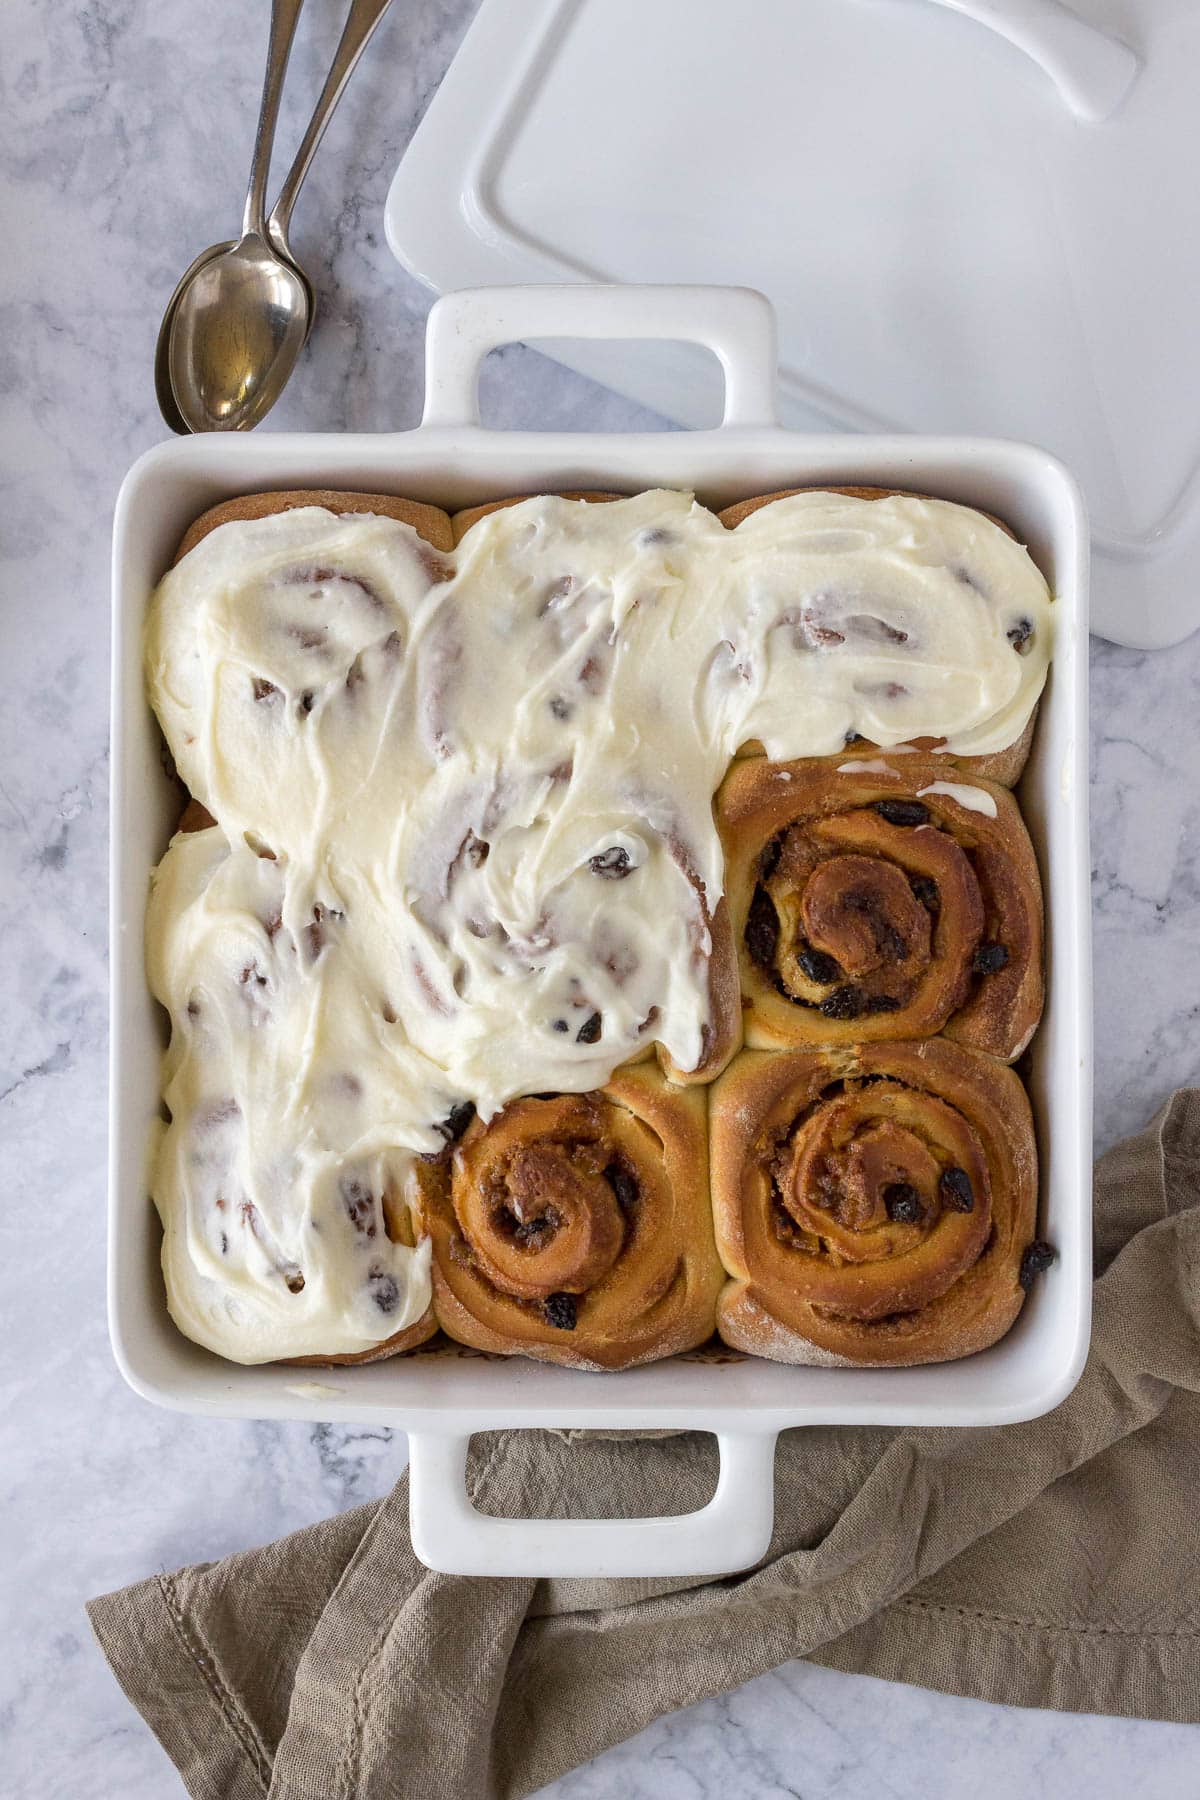 Half-frosted Chelsea buns in a baking dish.